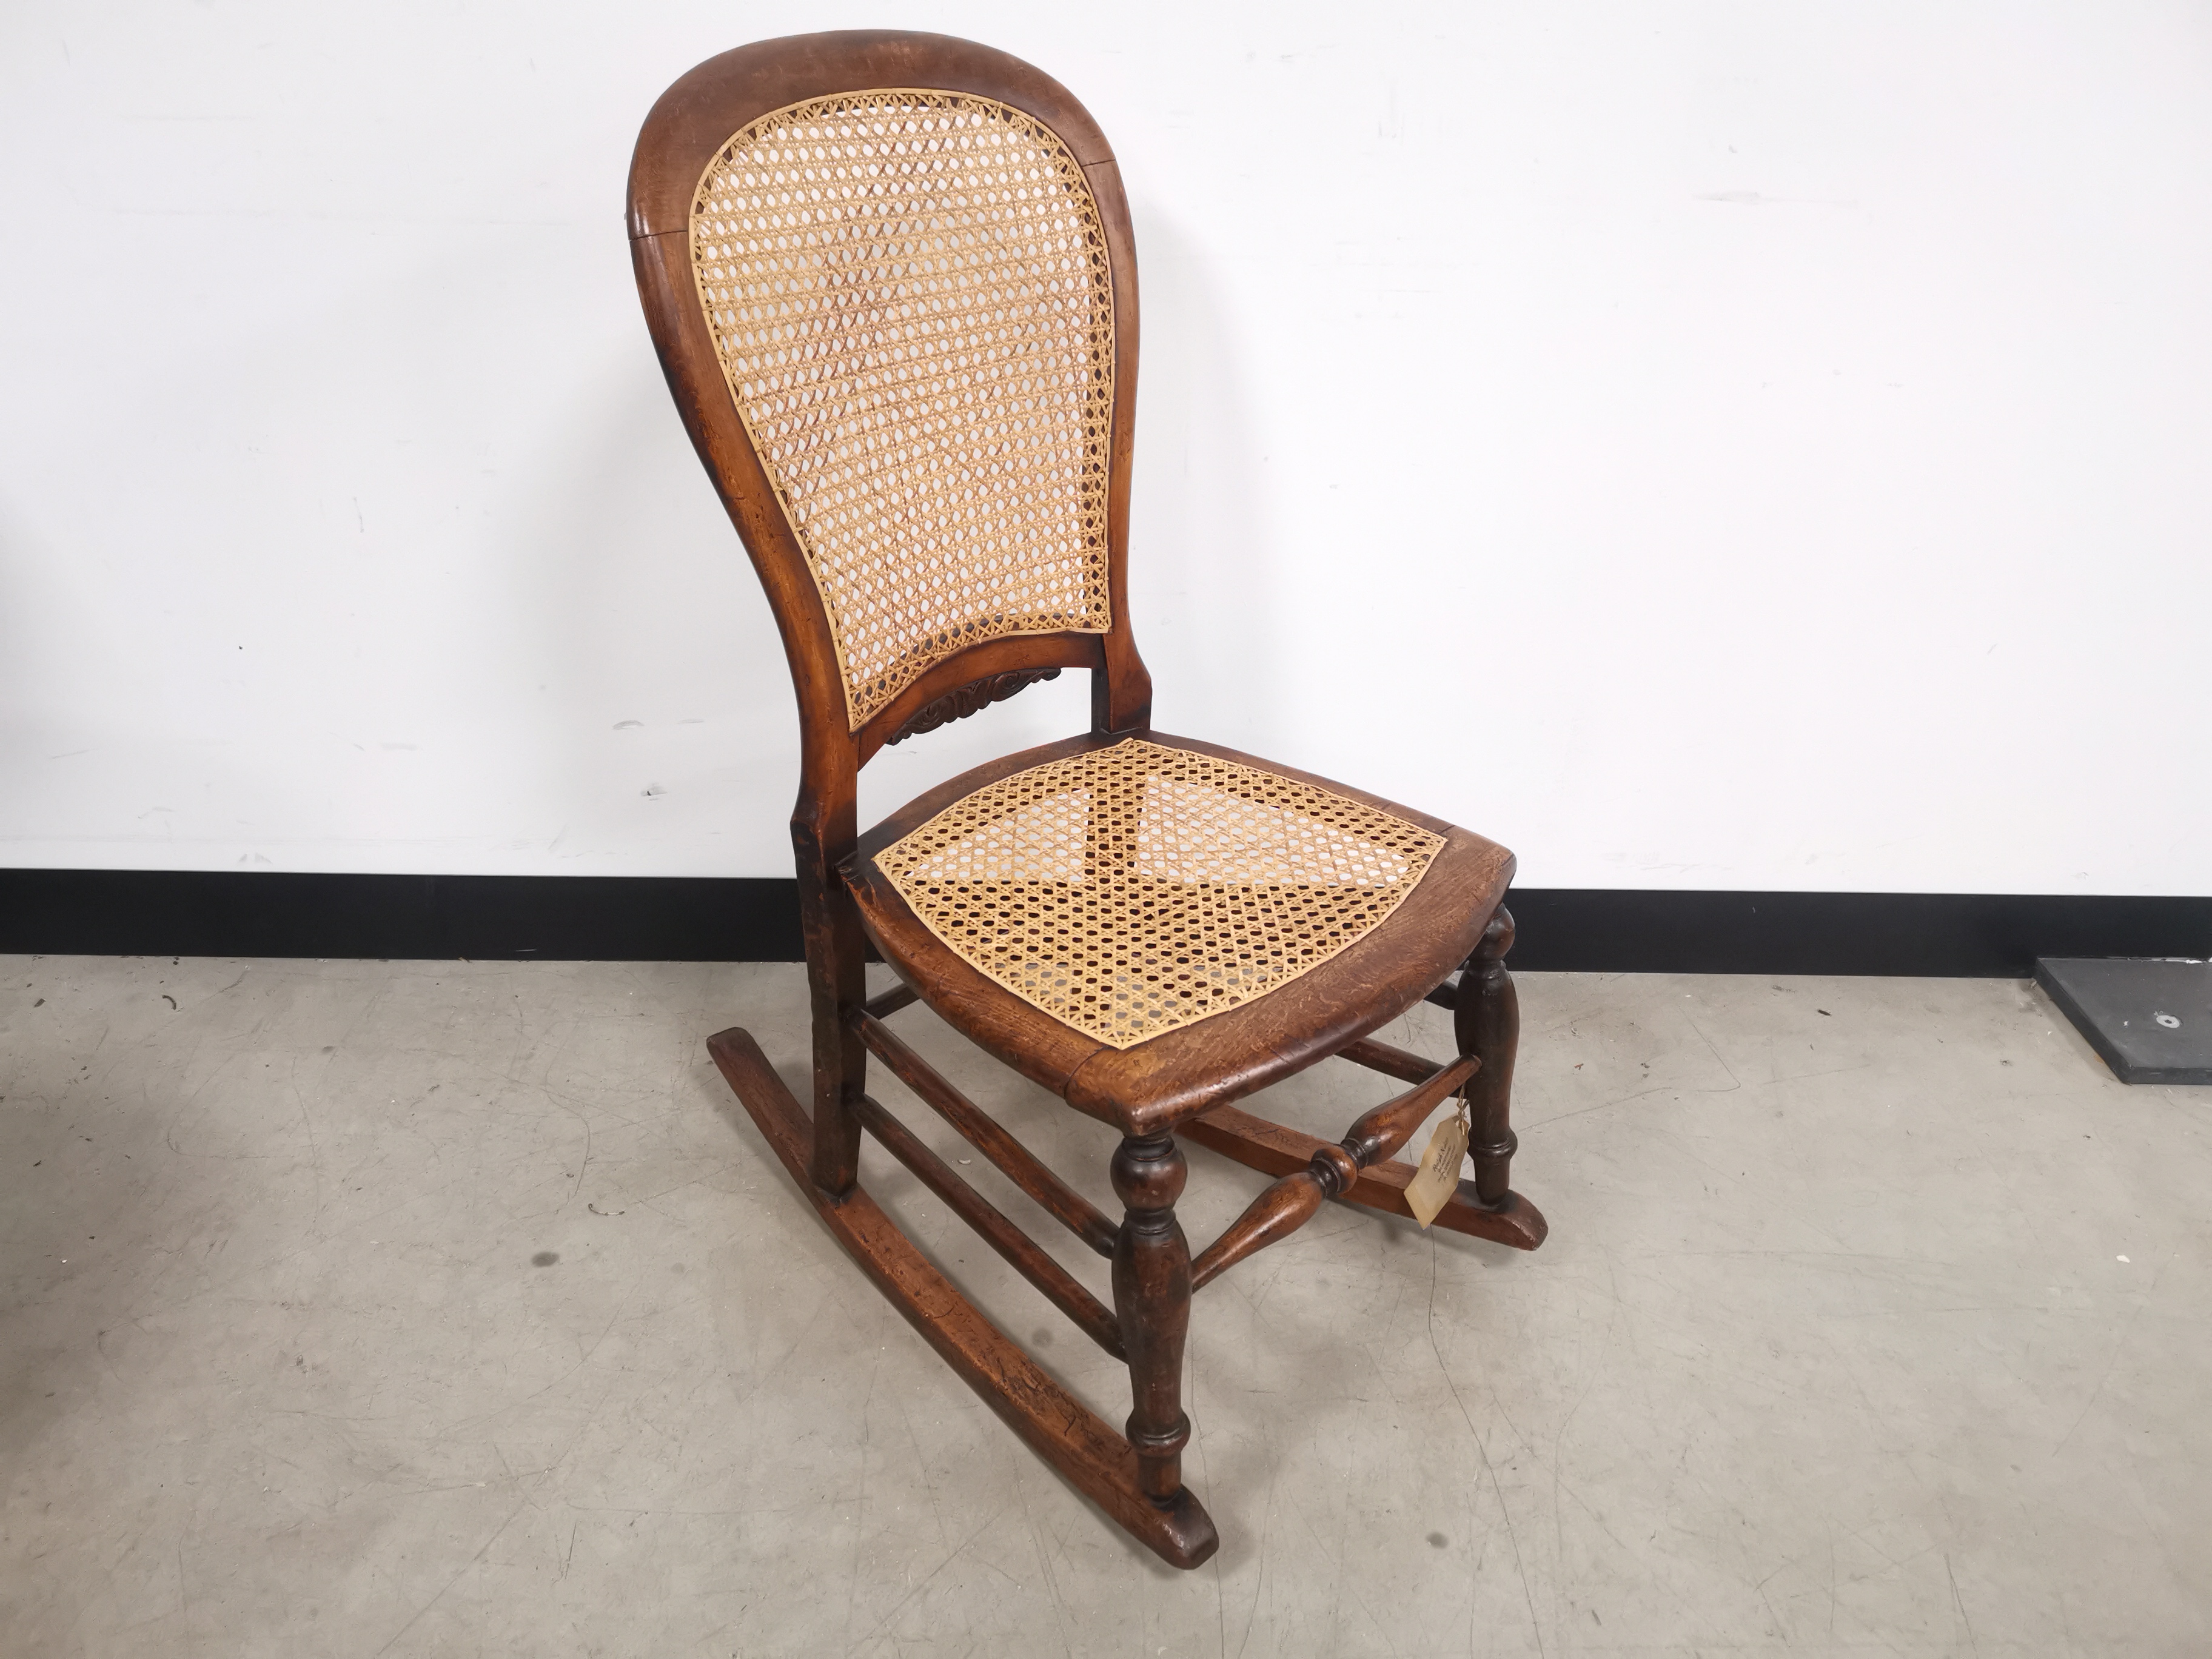 19th Century bergere rocking chair, with turned spindle supports. 41cm W x 64cm L x 88cm H